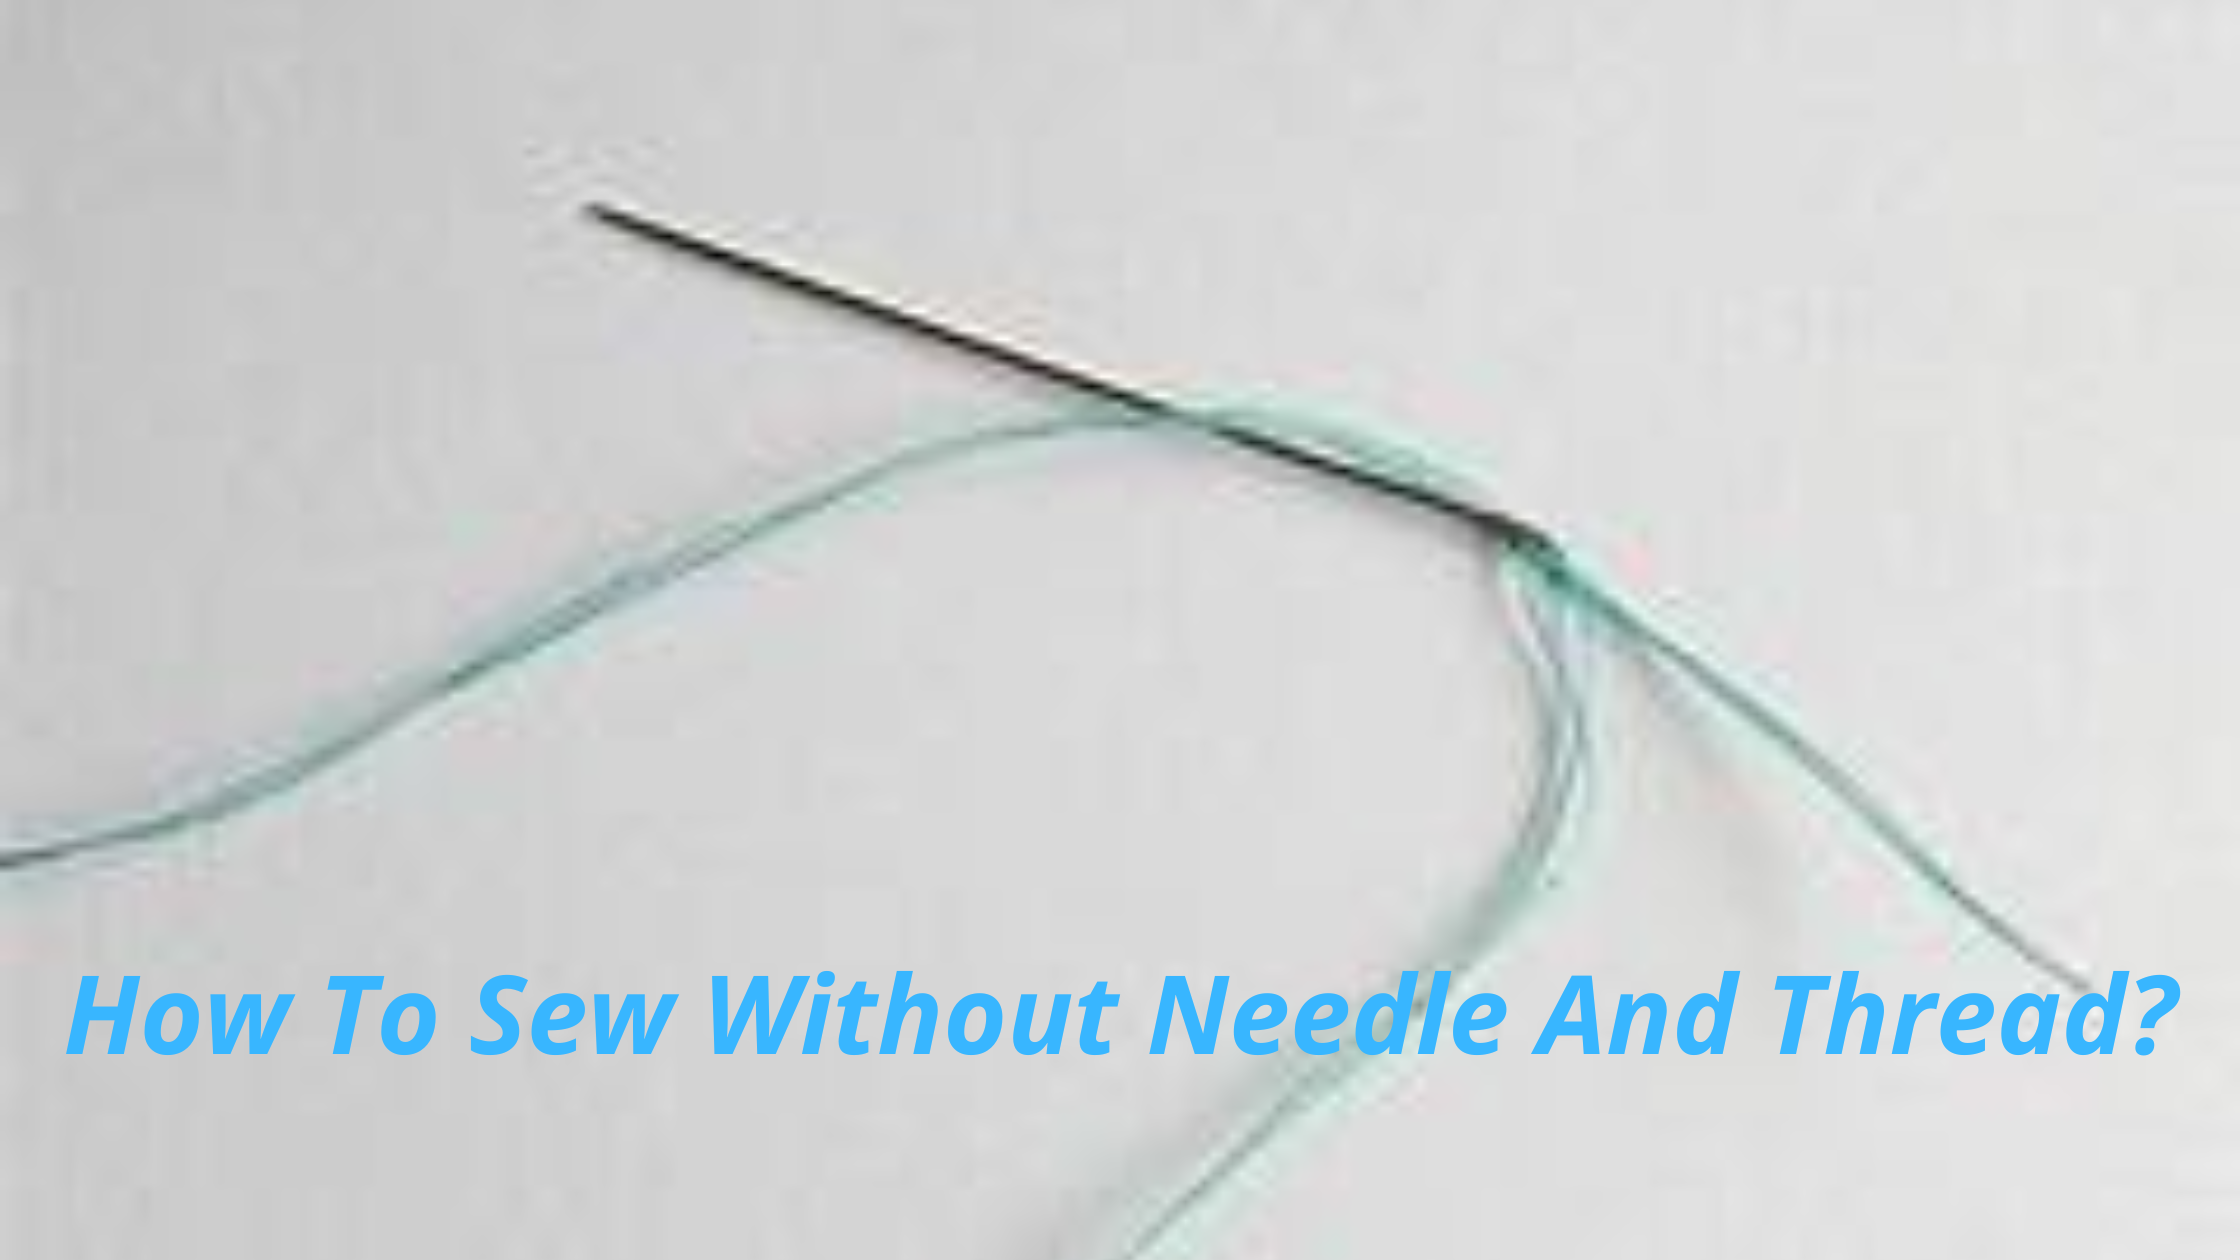 How To Sew Without Needle And Thread?